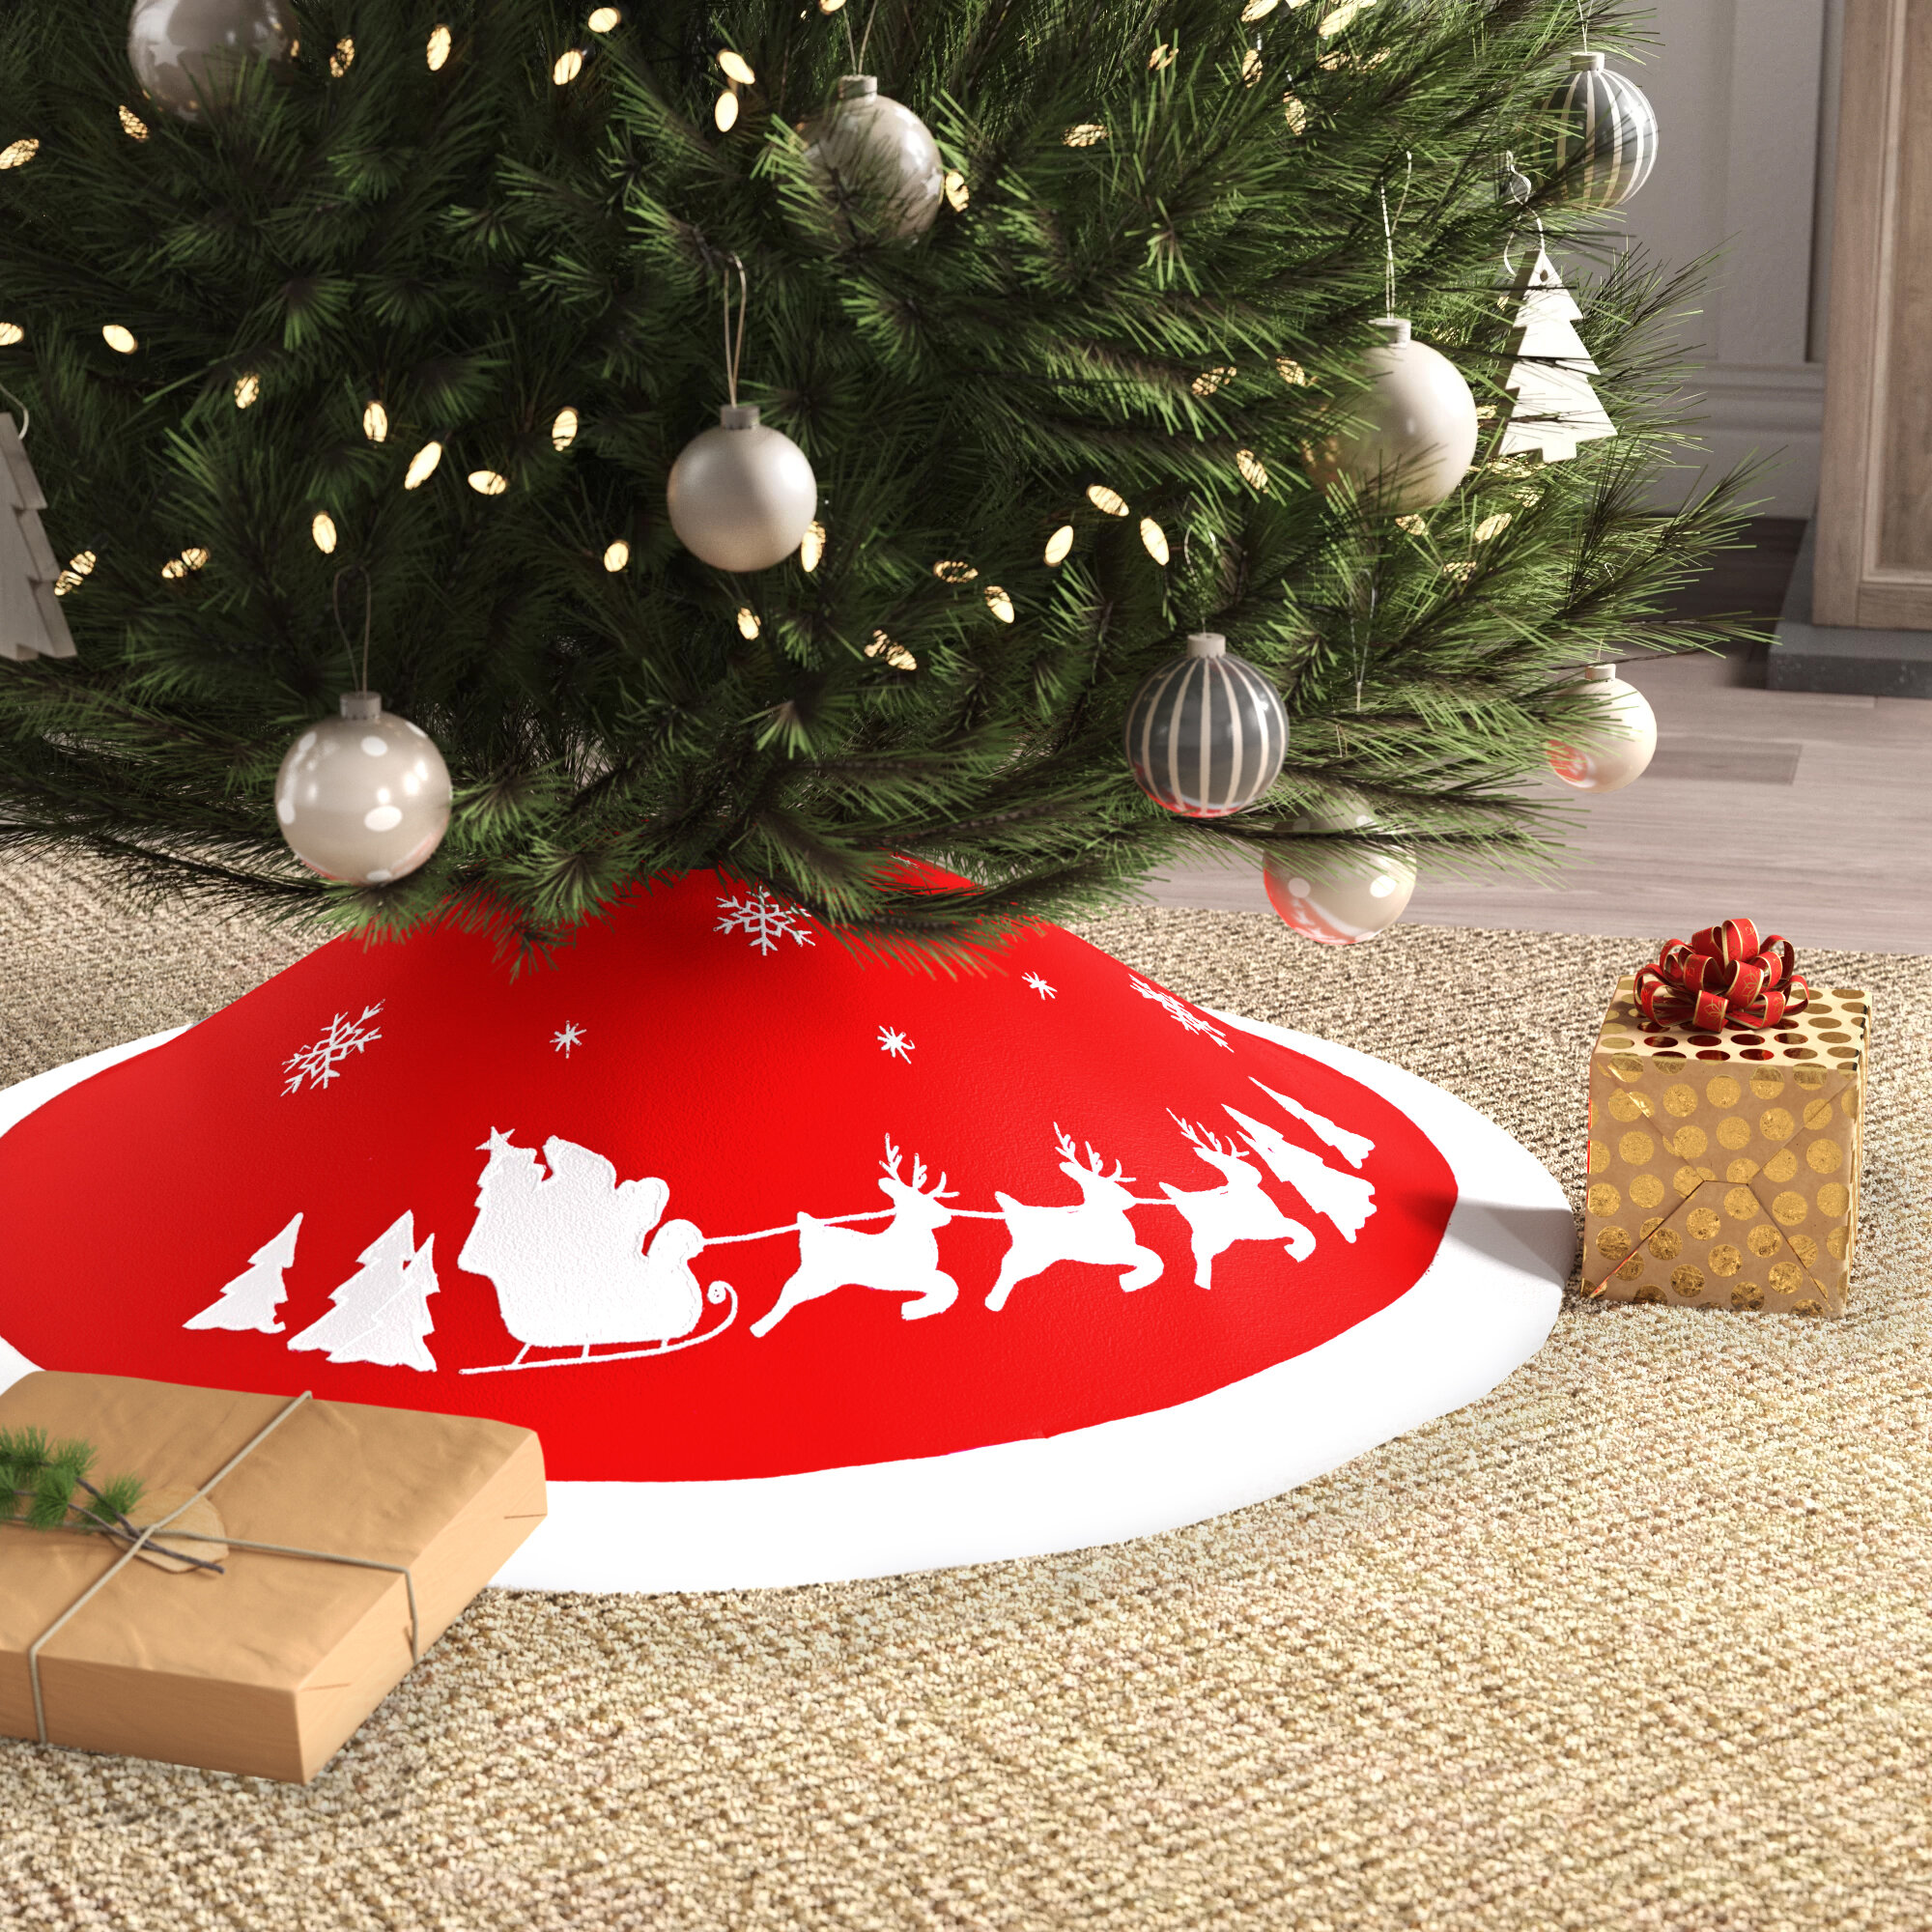 New Christmas Tree Skirt Mat Cover with Santa Claus Holiday Decorations Fashion 